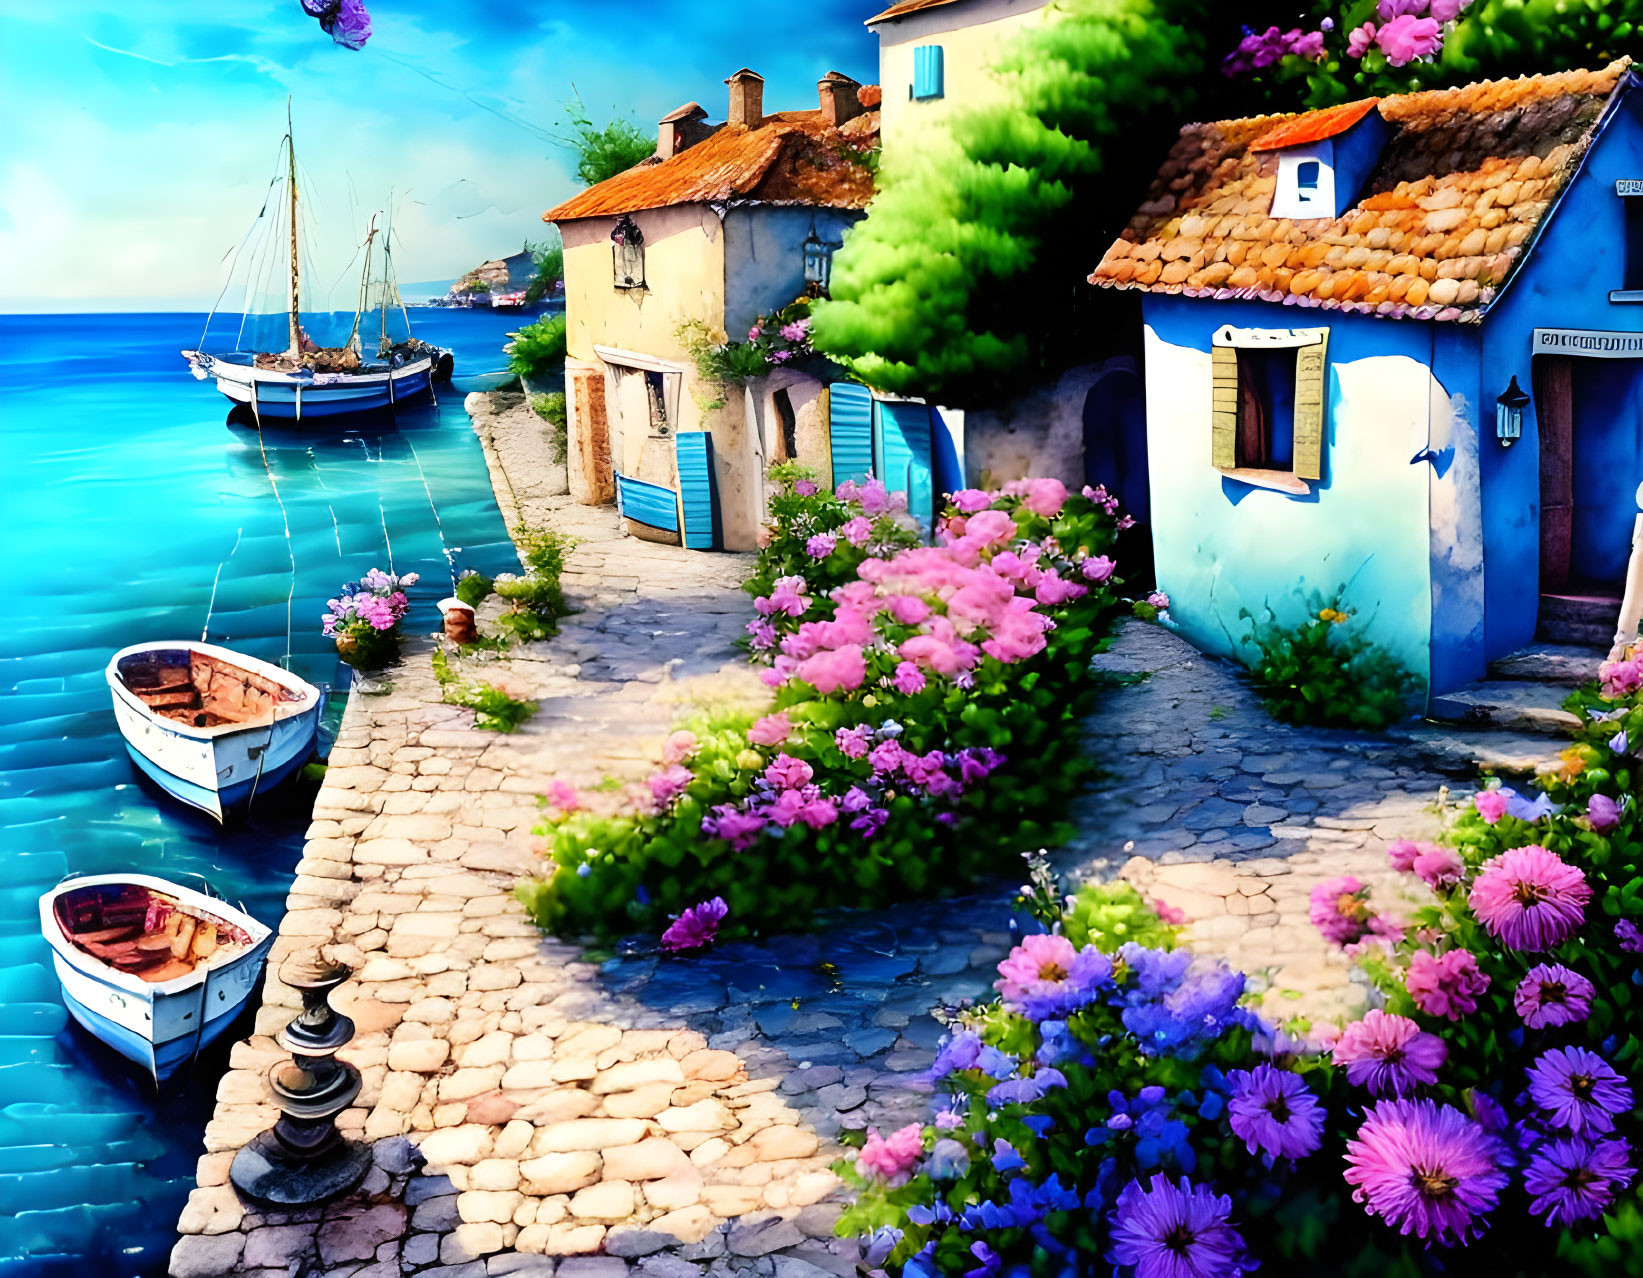 Colorful Coastal Scene with Houses, Flowers, Boats, and Cobblestone Waterfront